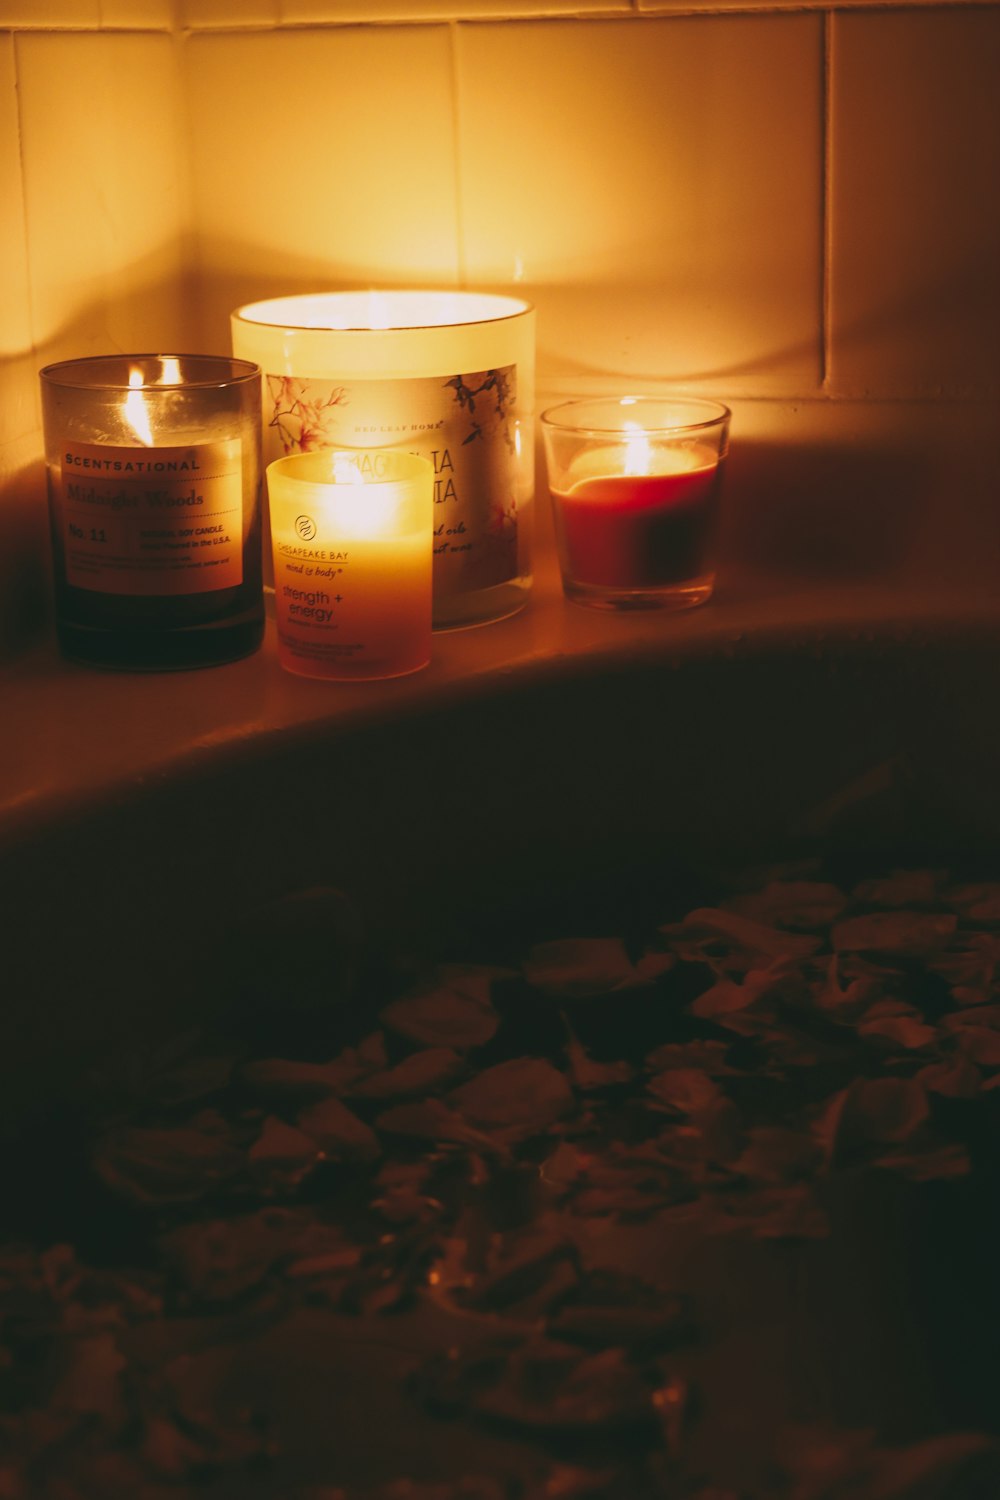 A bath tub filled with candles next to a tub filled with rocks photo – Free  Houston Image on Unsplash